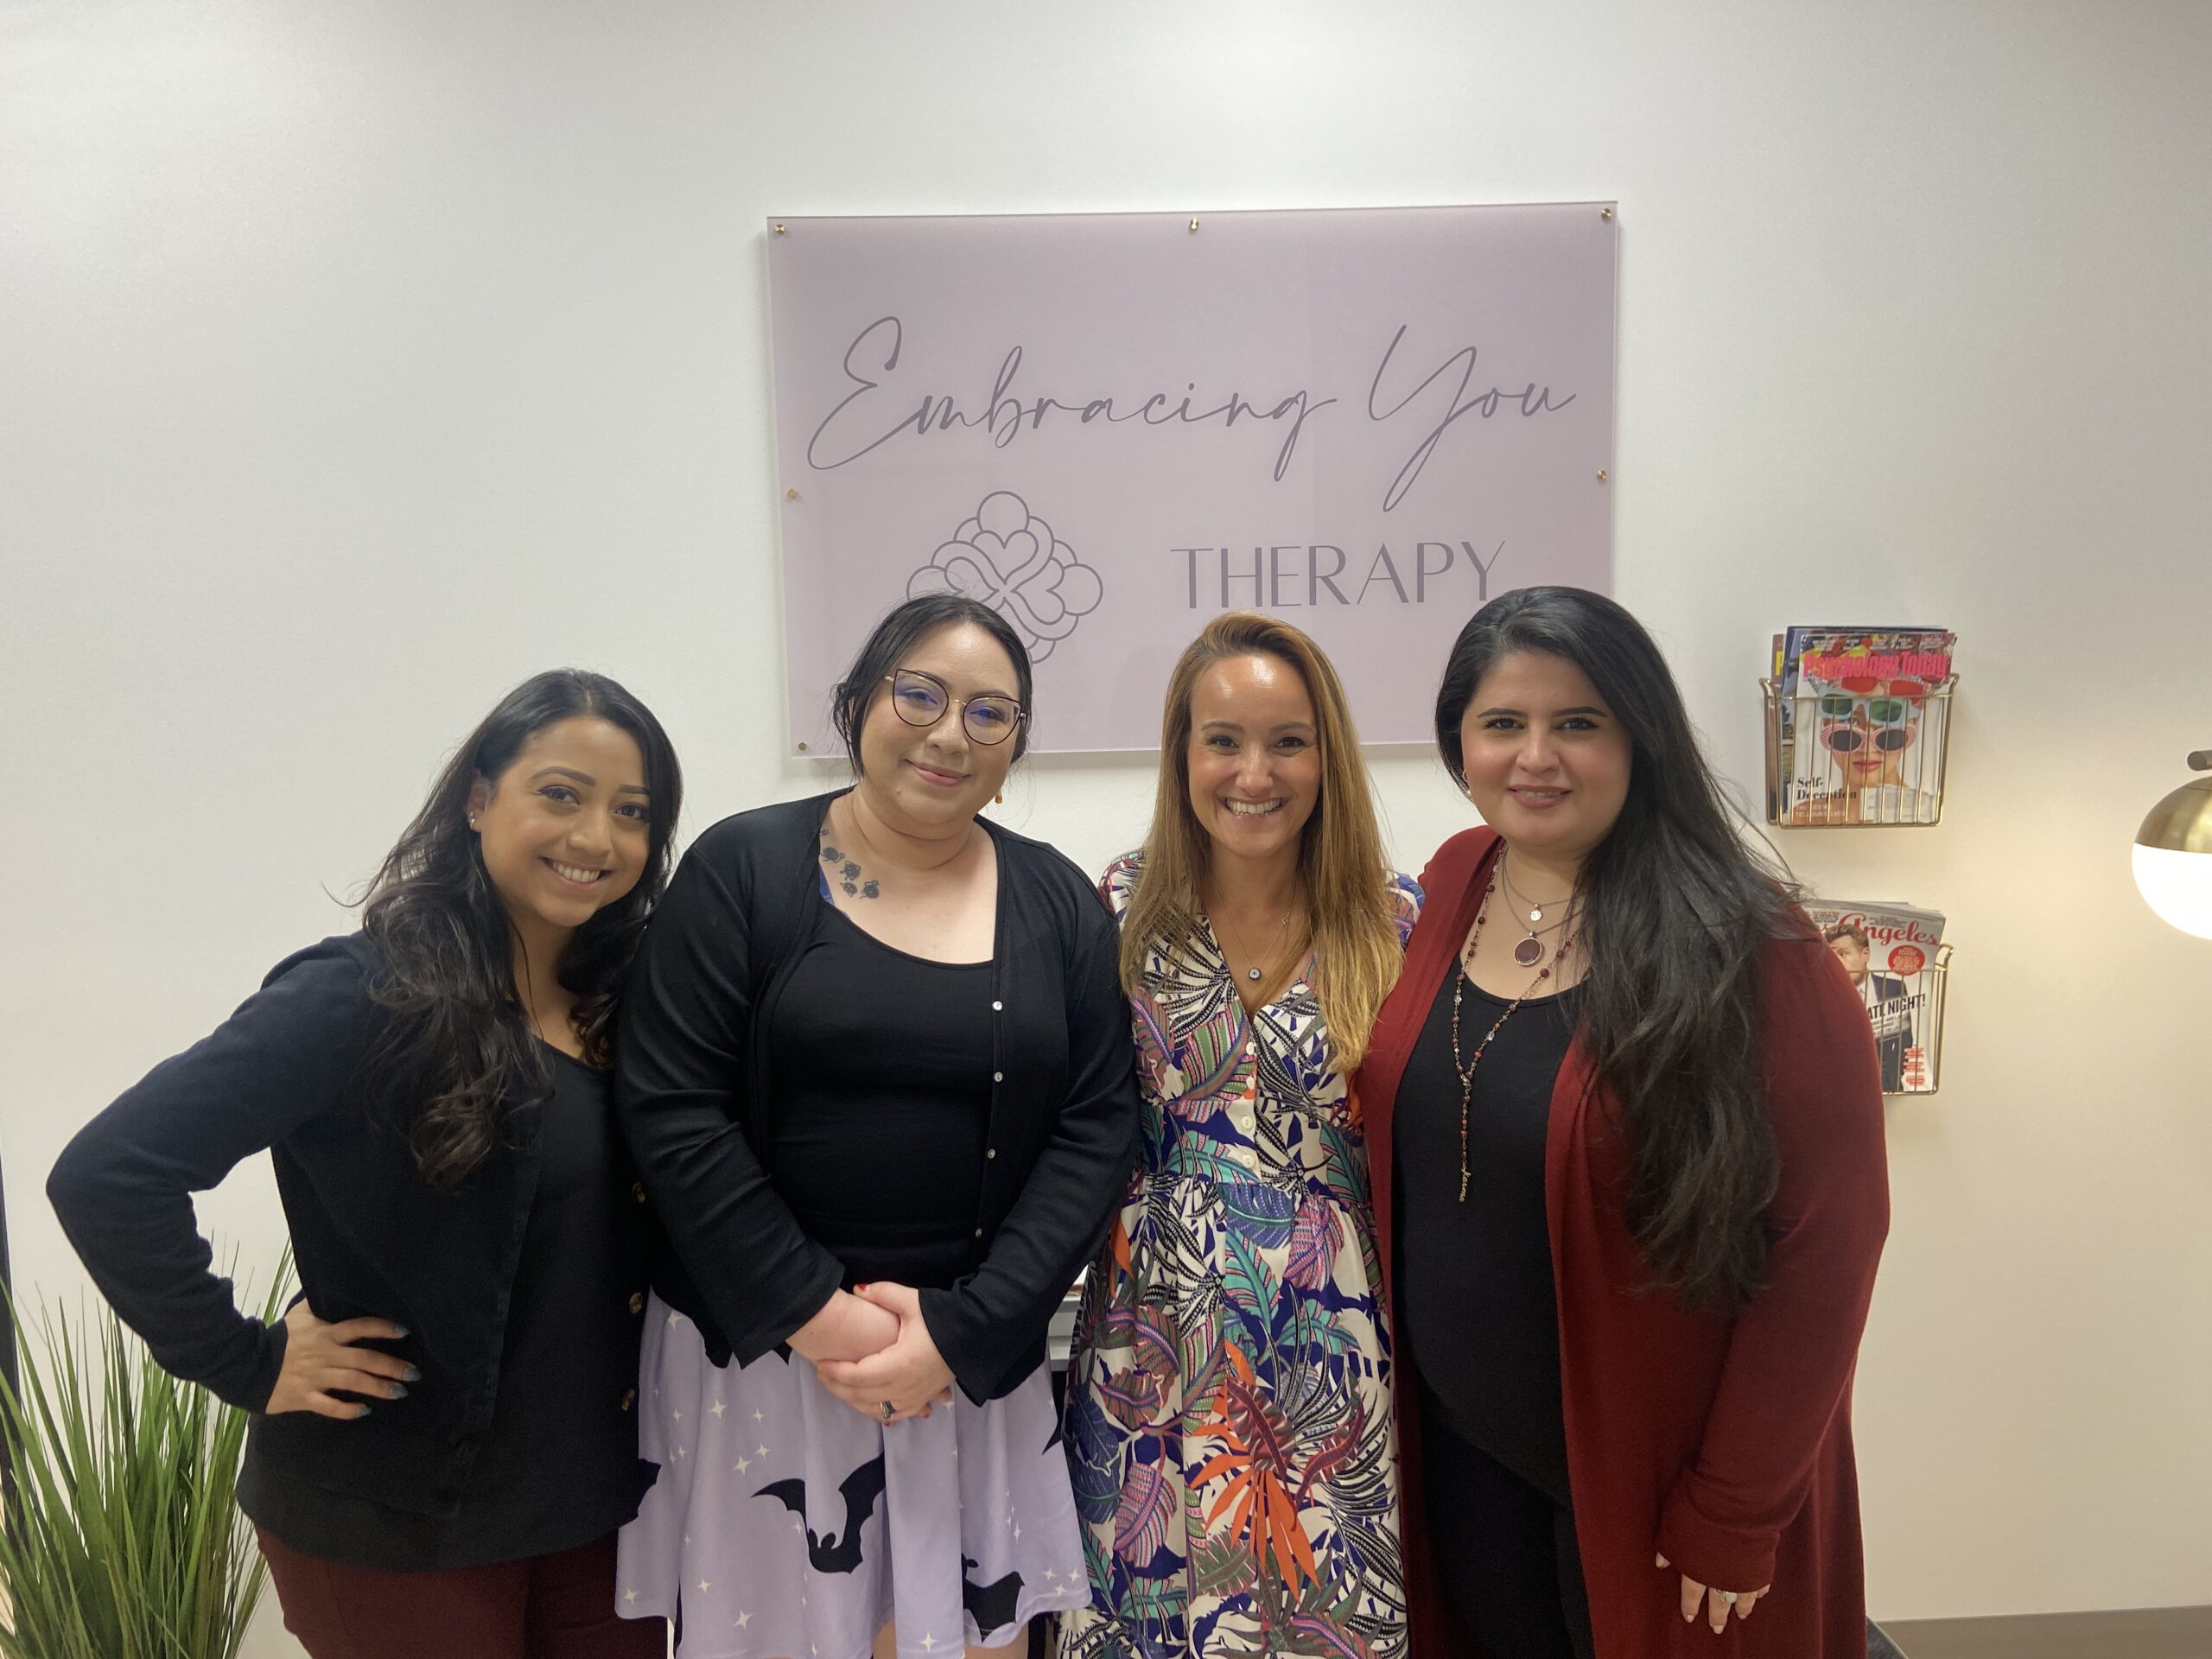 Therapist team smiling and posing for a photo in front of a sign that reads, Embracing You Therapy.